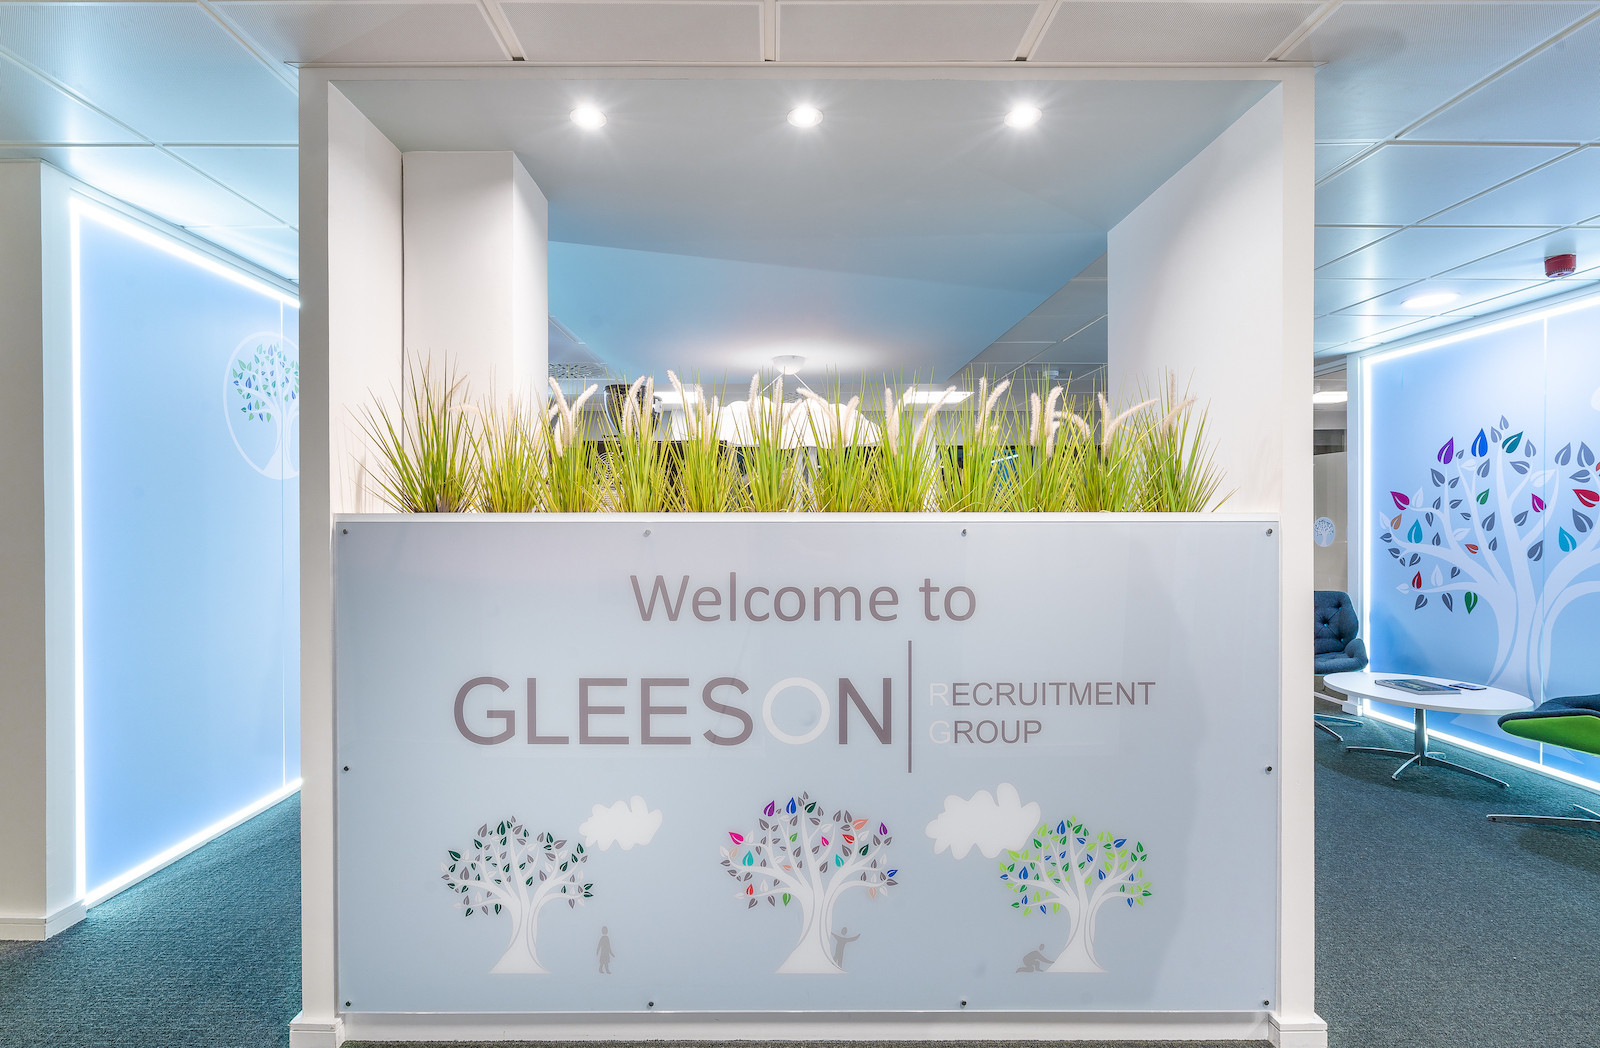 Gleeson Recruitment Celebrates Growth With Brand New Office Space